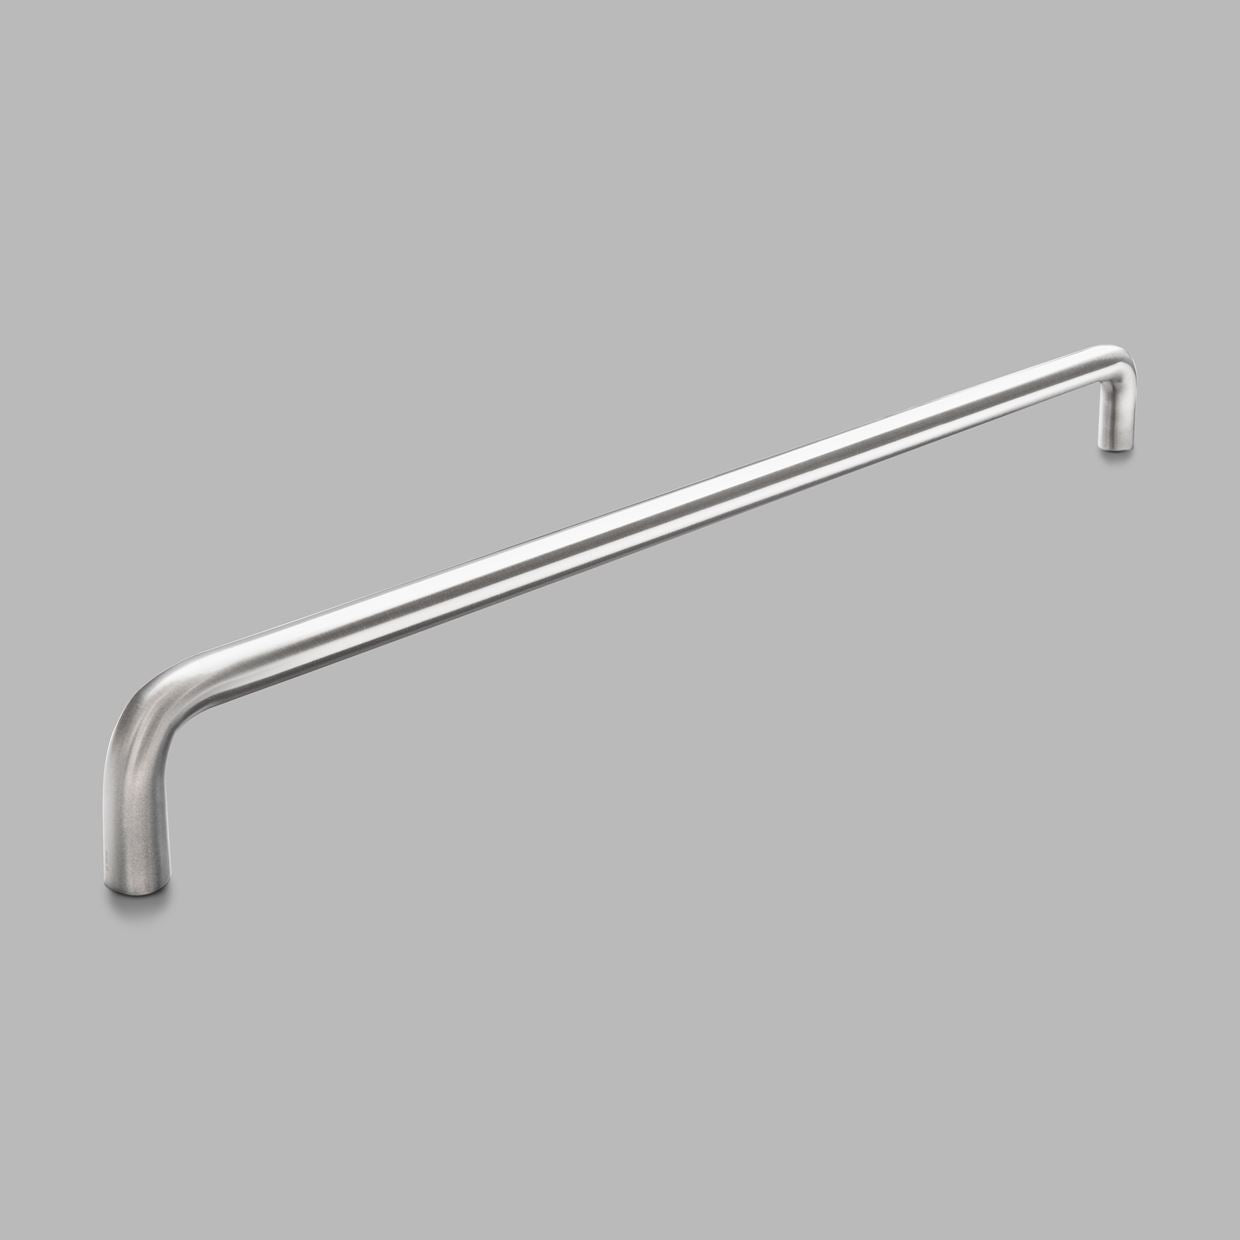 A d line Knud Straight Pull Handle 14 on a gray background.